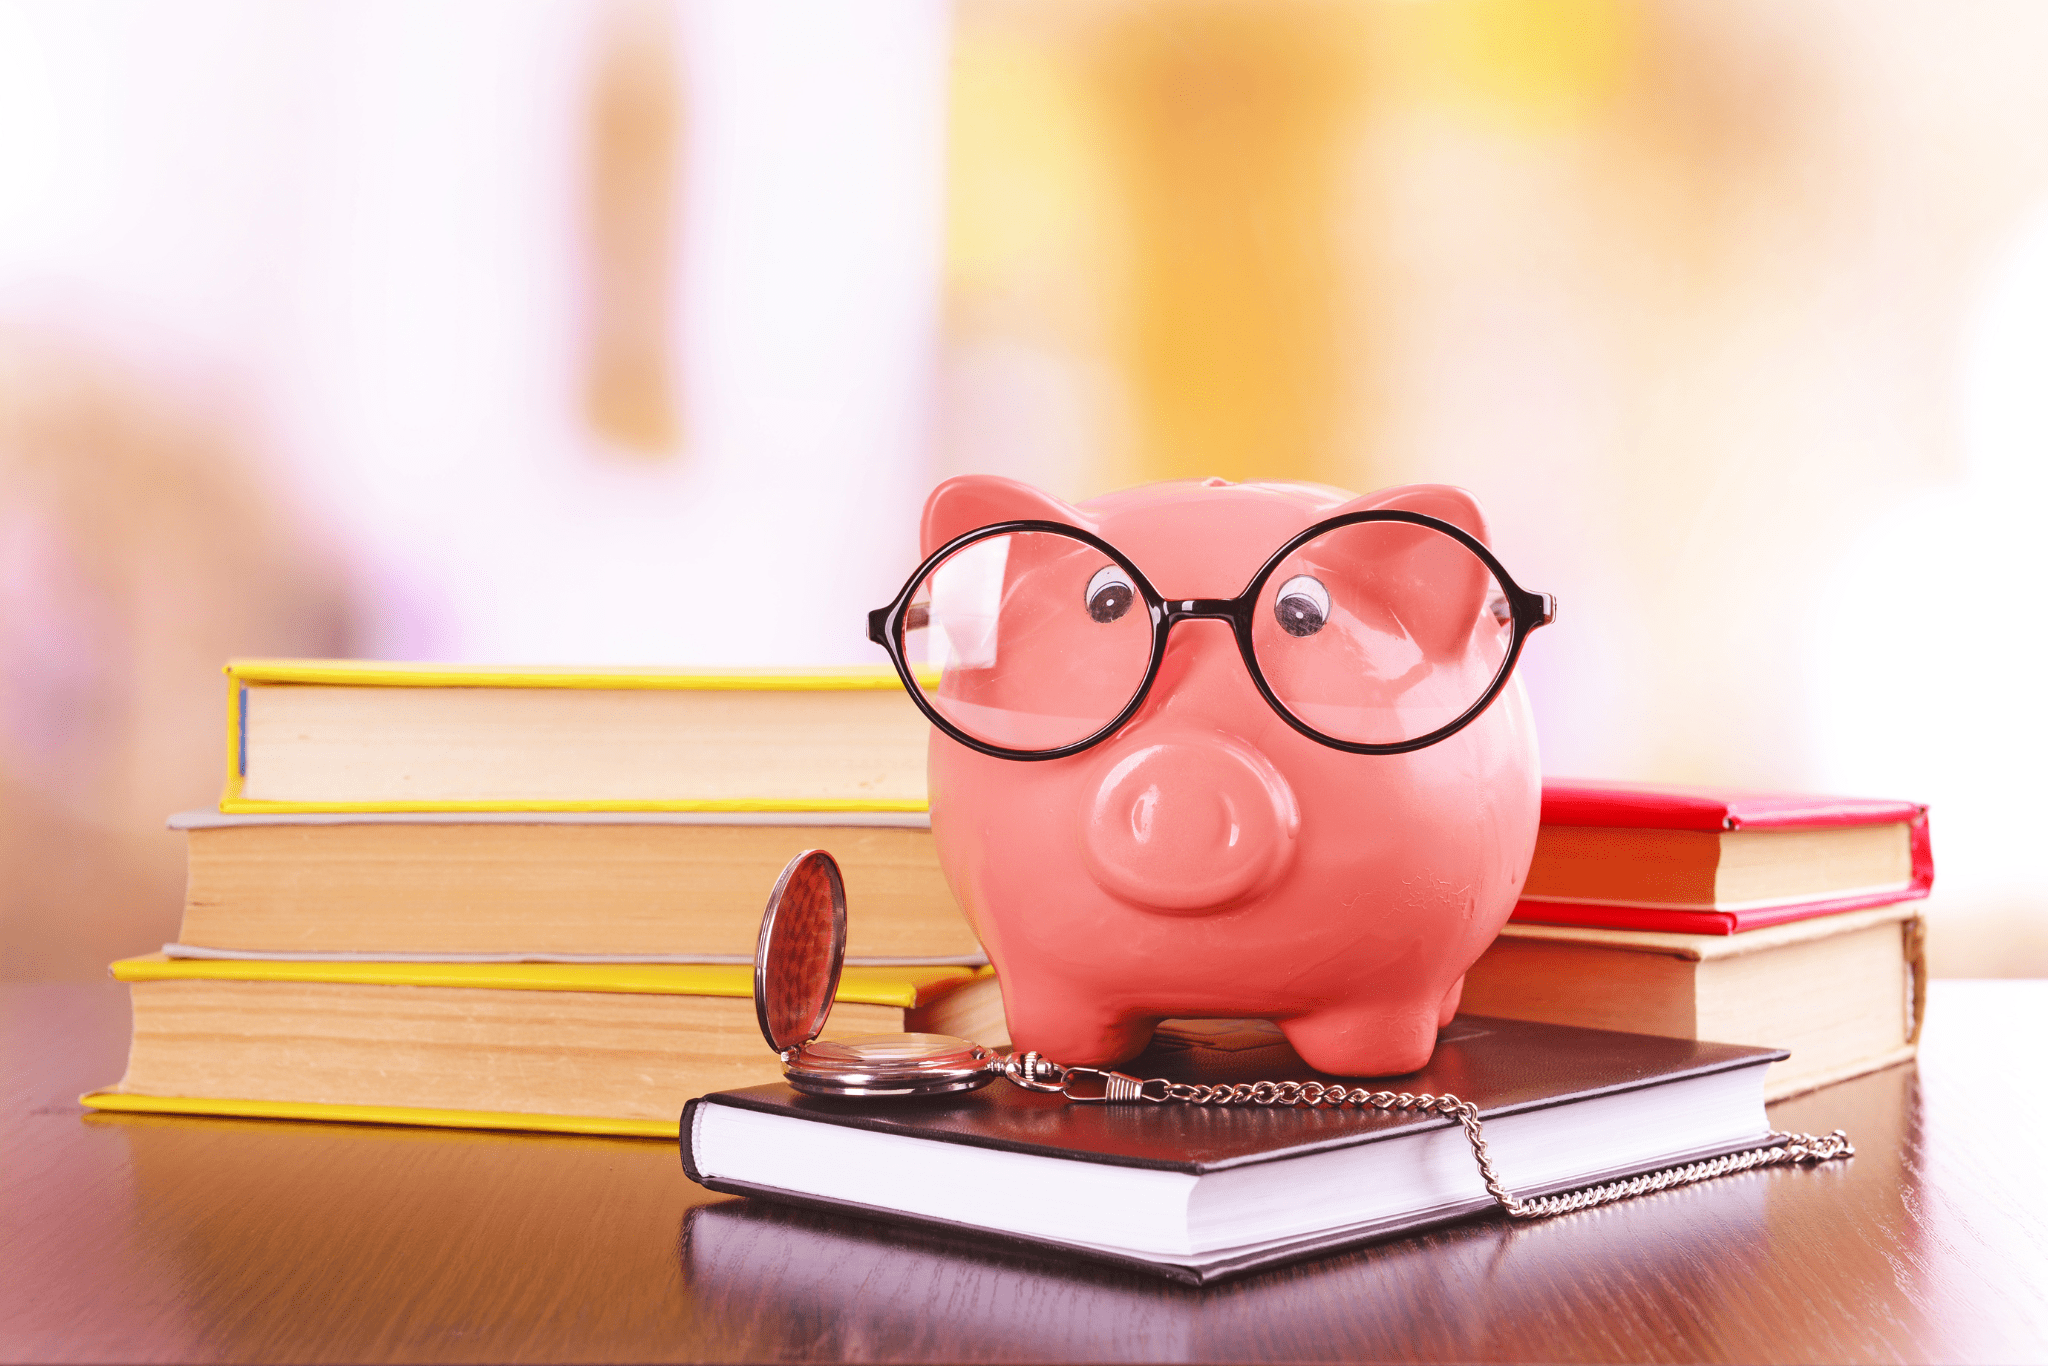 April is National Financial Literacy Month